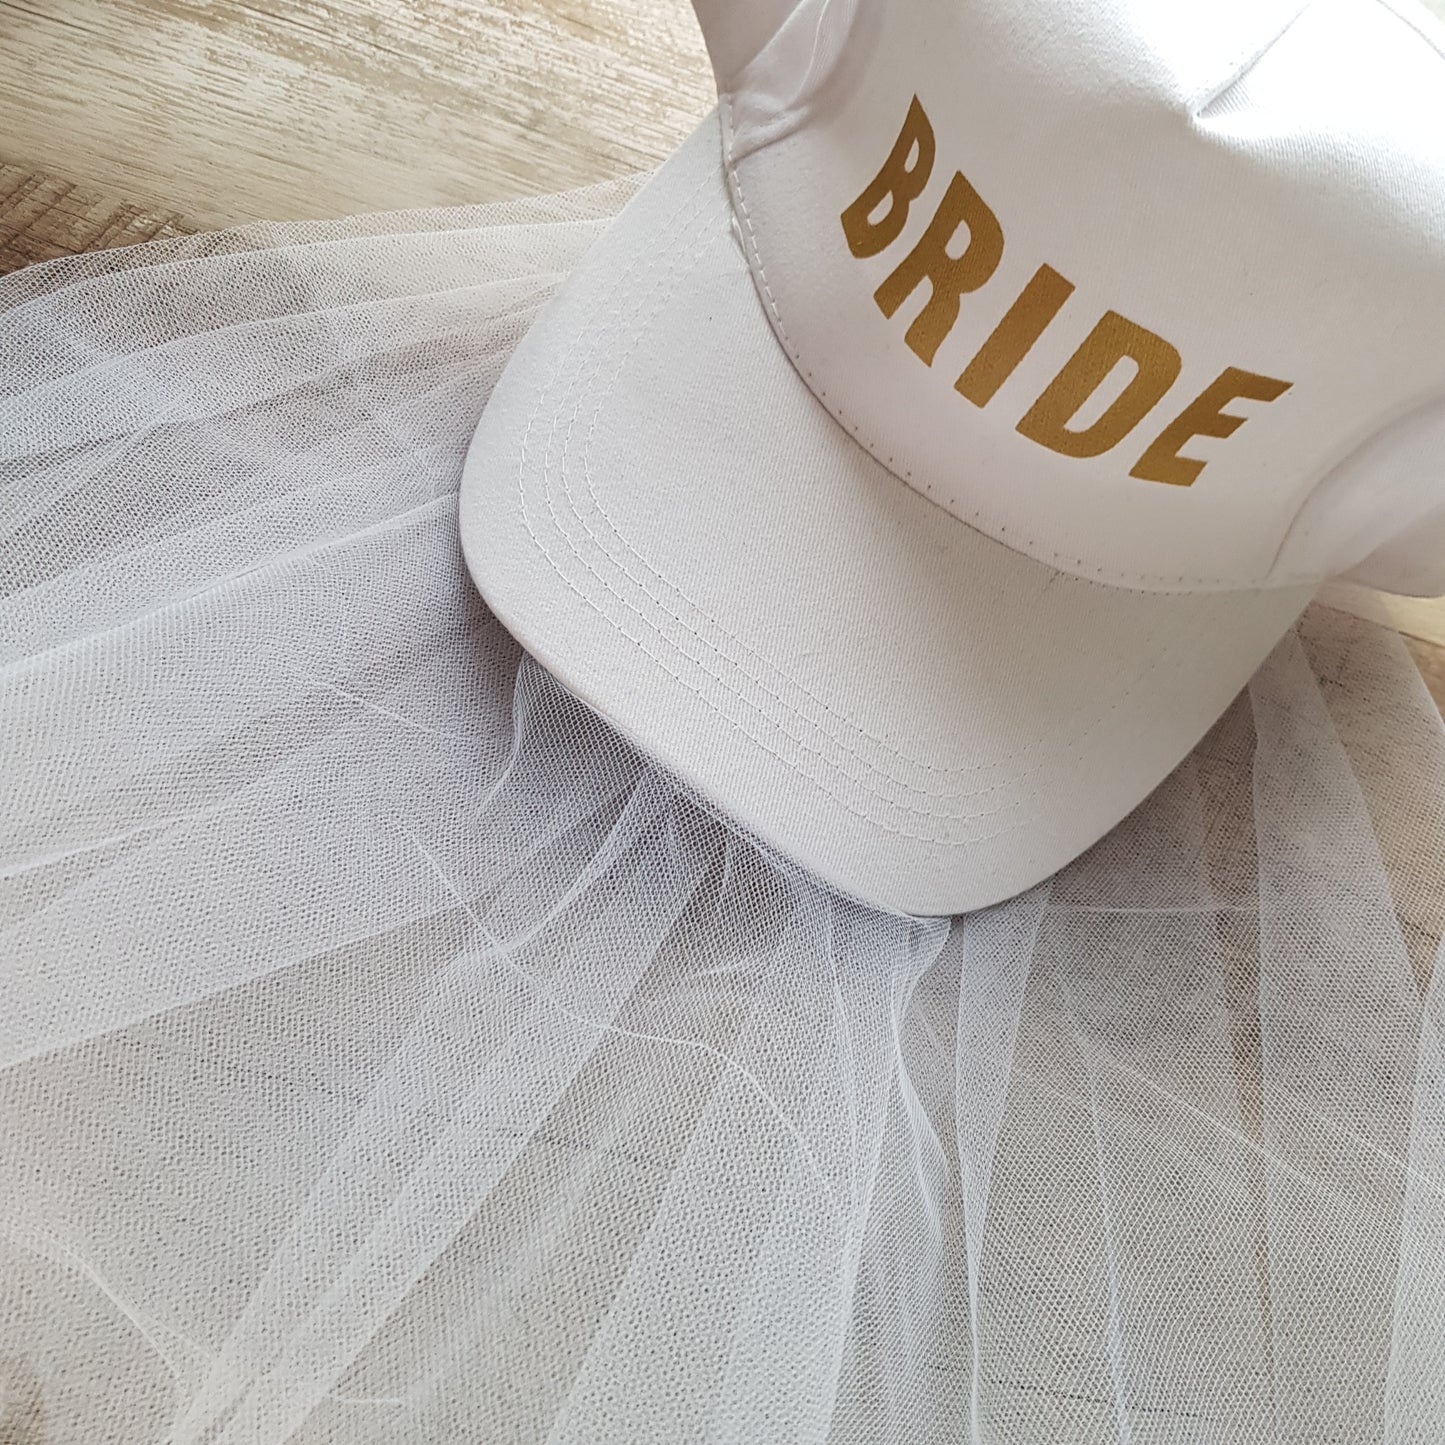 Gold and White Bride to Be cap veil